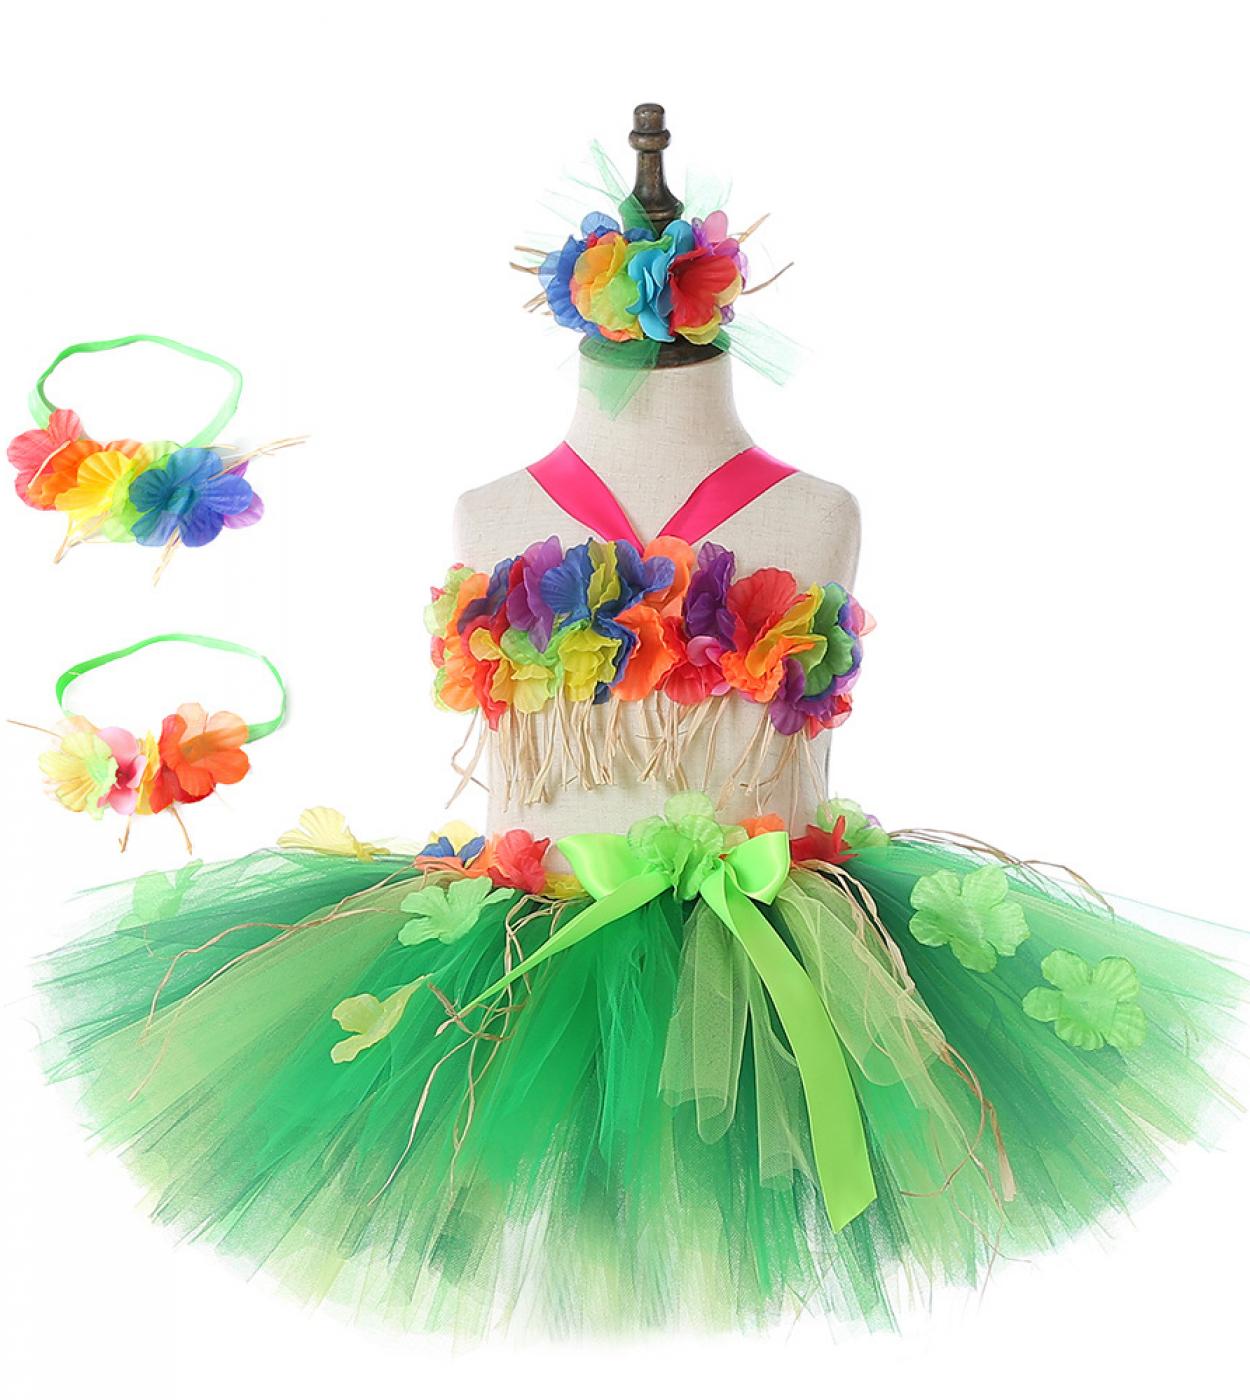 Flowers Hawaii Grass Skirt Outfits For Girls Kids Dance Tutu Skirts For Campfire Party Princess Toddler Tutus Fancy Cost